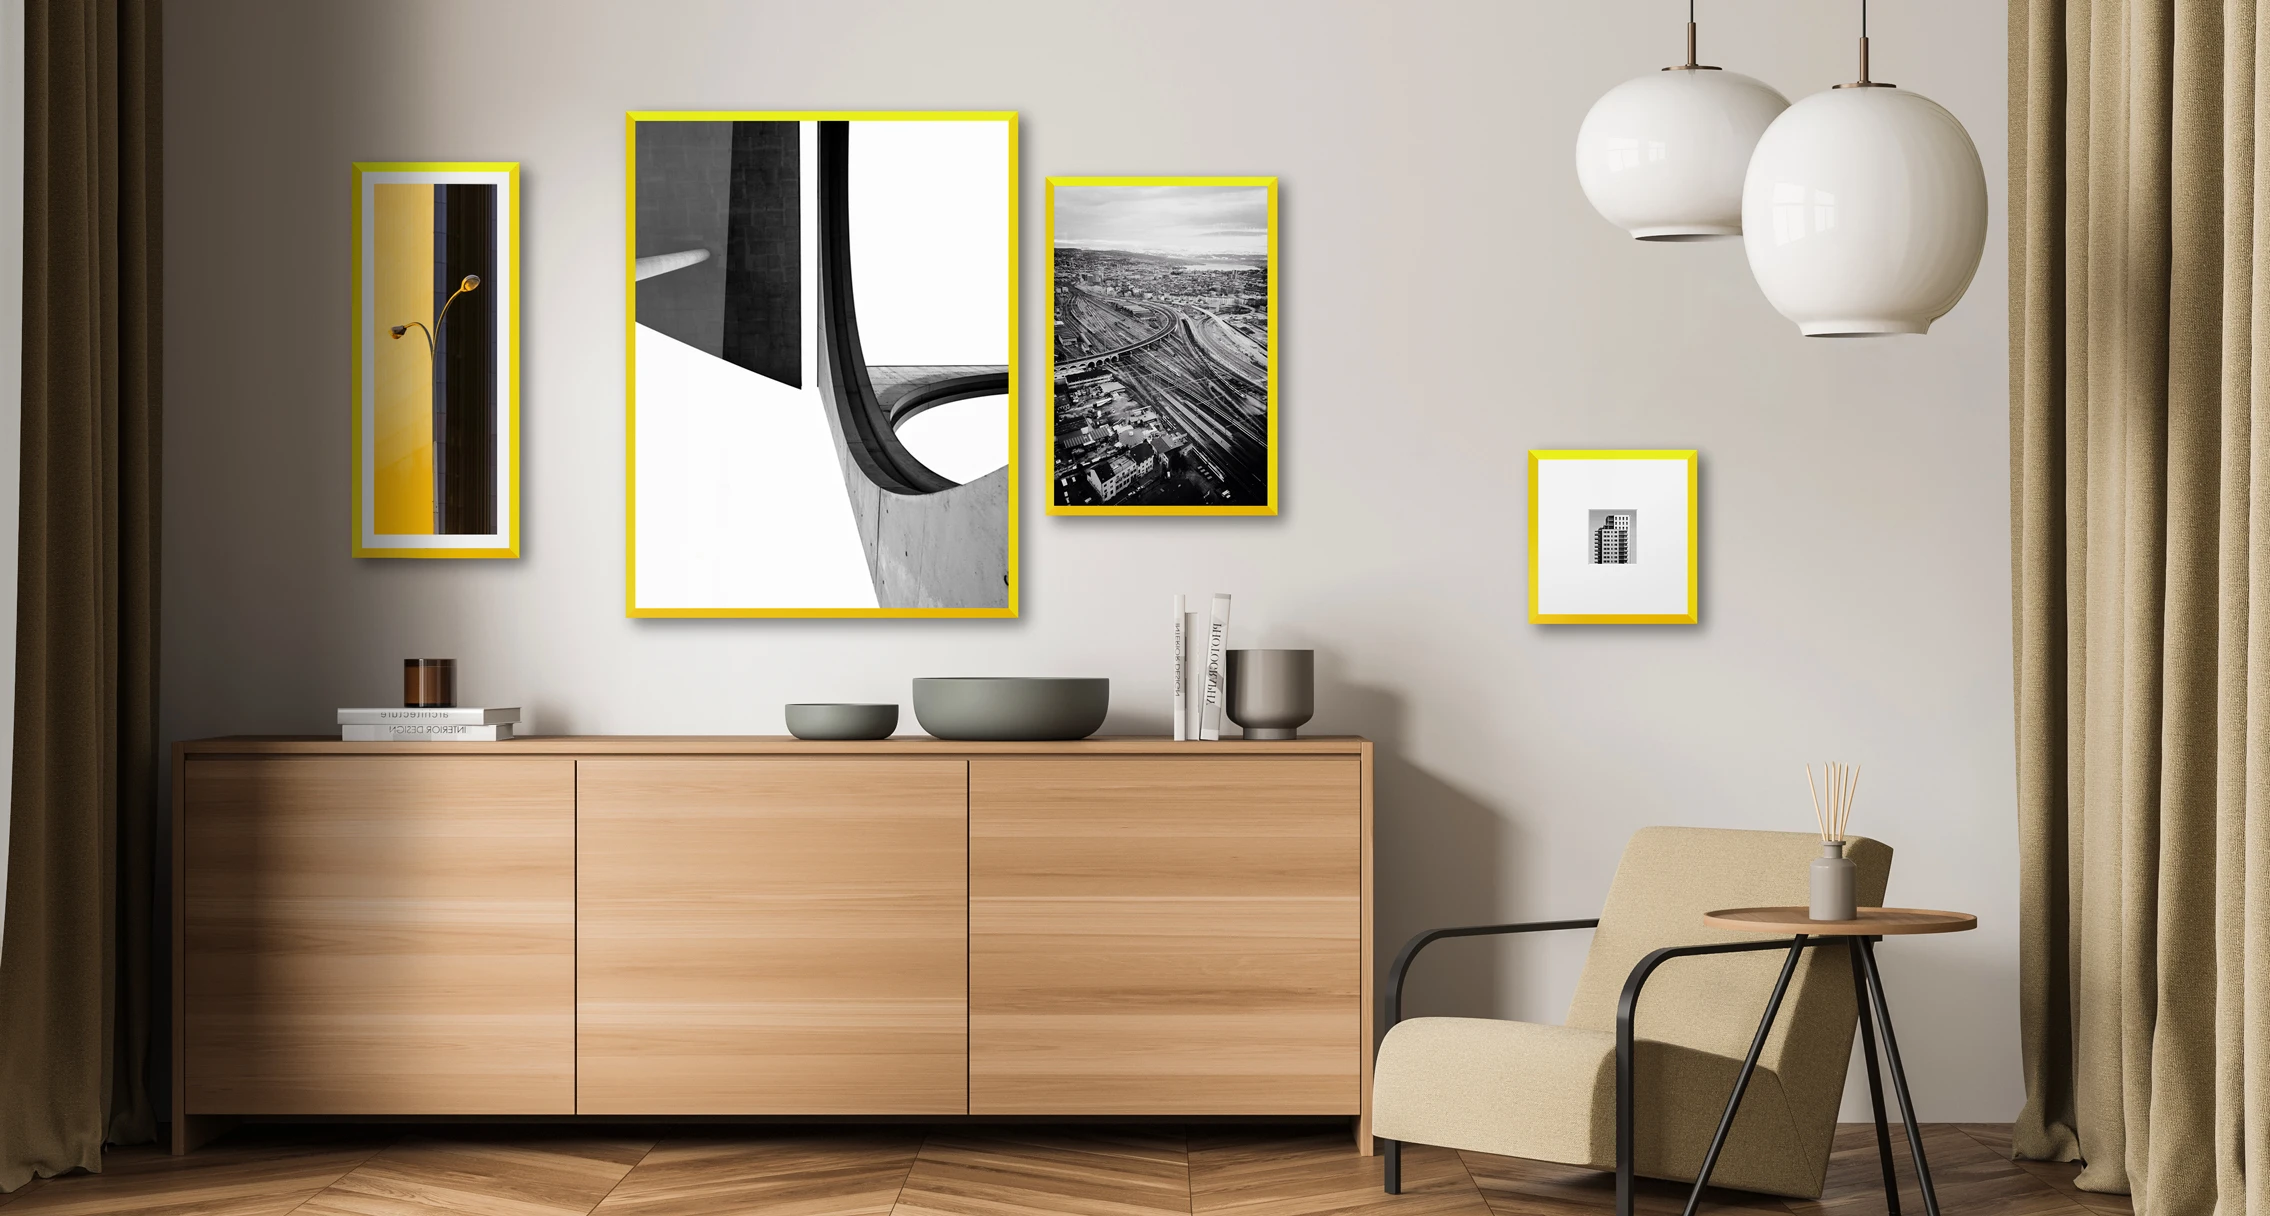 Multiple design edition frames in yellow hanging on a wall.